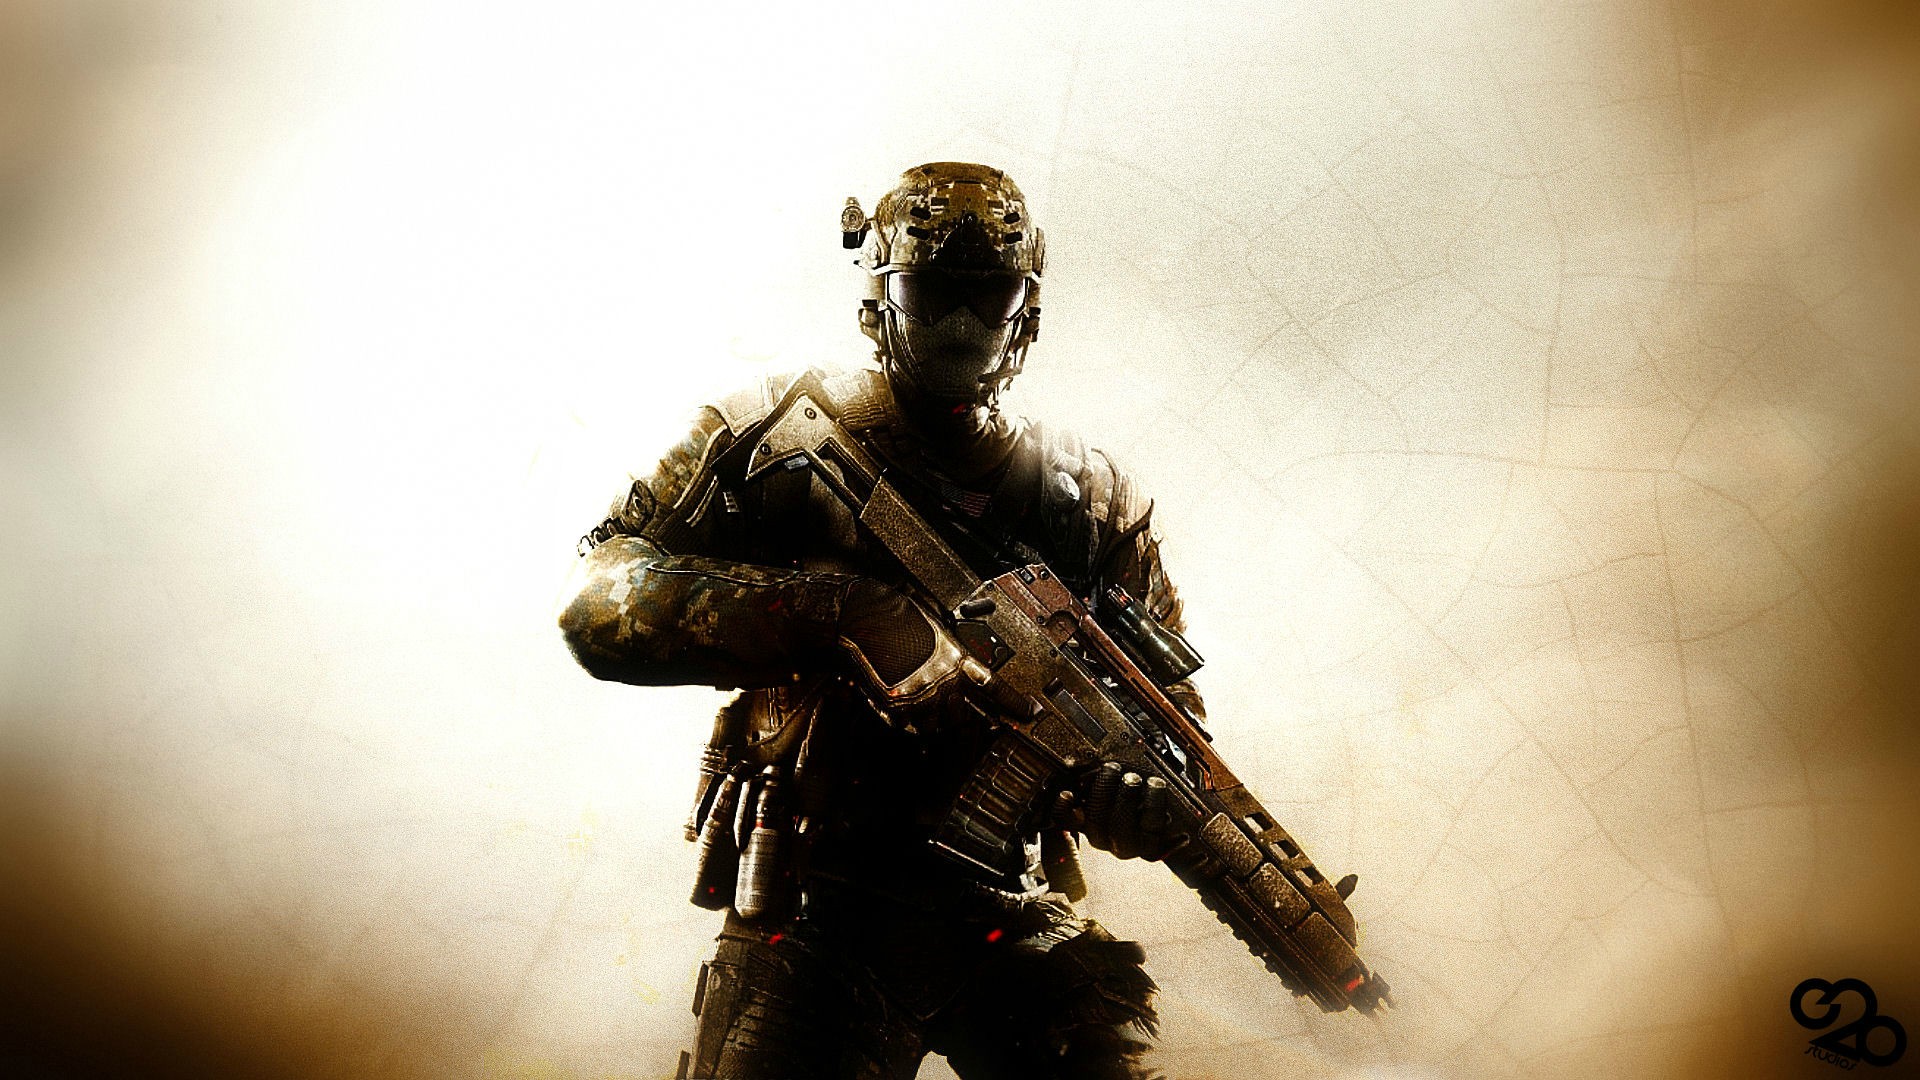 New BO2 Wallpaper The Unofficial Call of Duty Forums - Advanced.